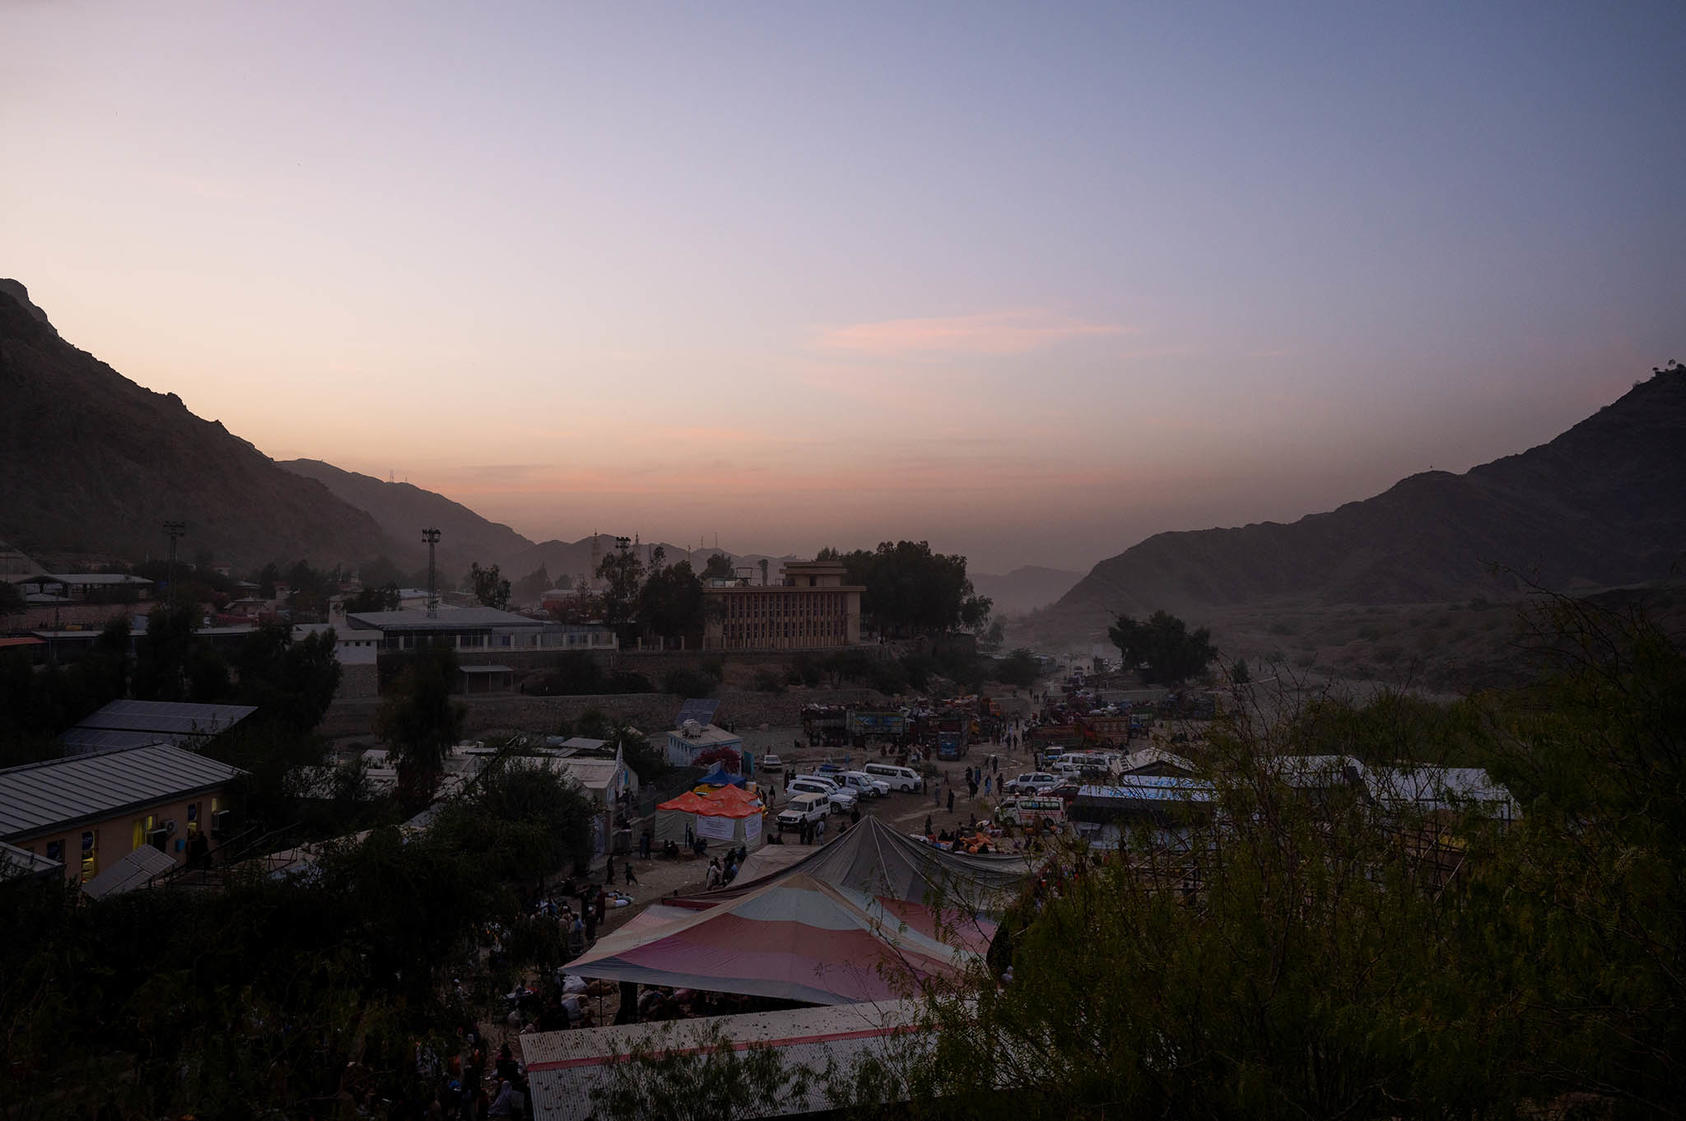 Dusk at the busy Torkham border crossing between eastern Afghanistan and Pakistan. October 23, 2023. (Elise Blanchard/The New York Times)